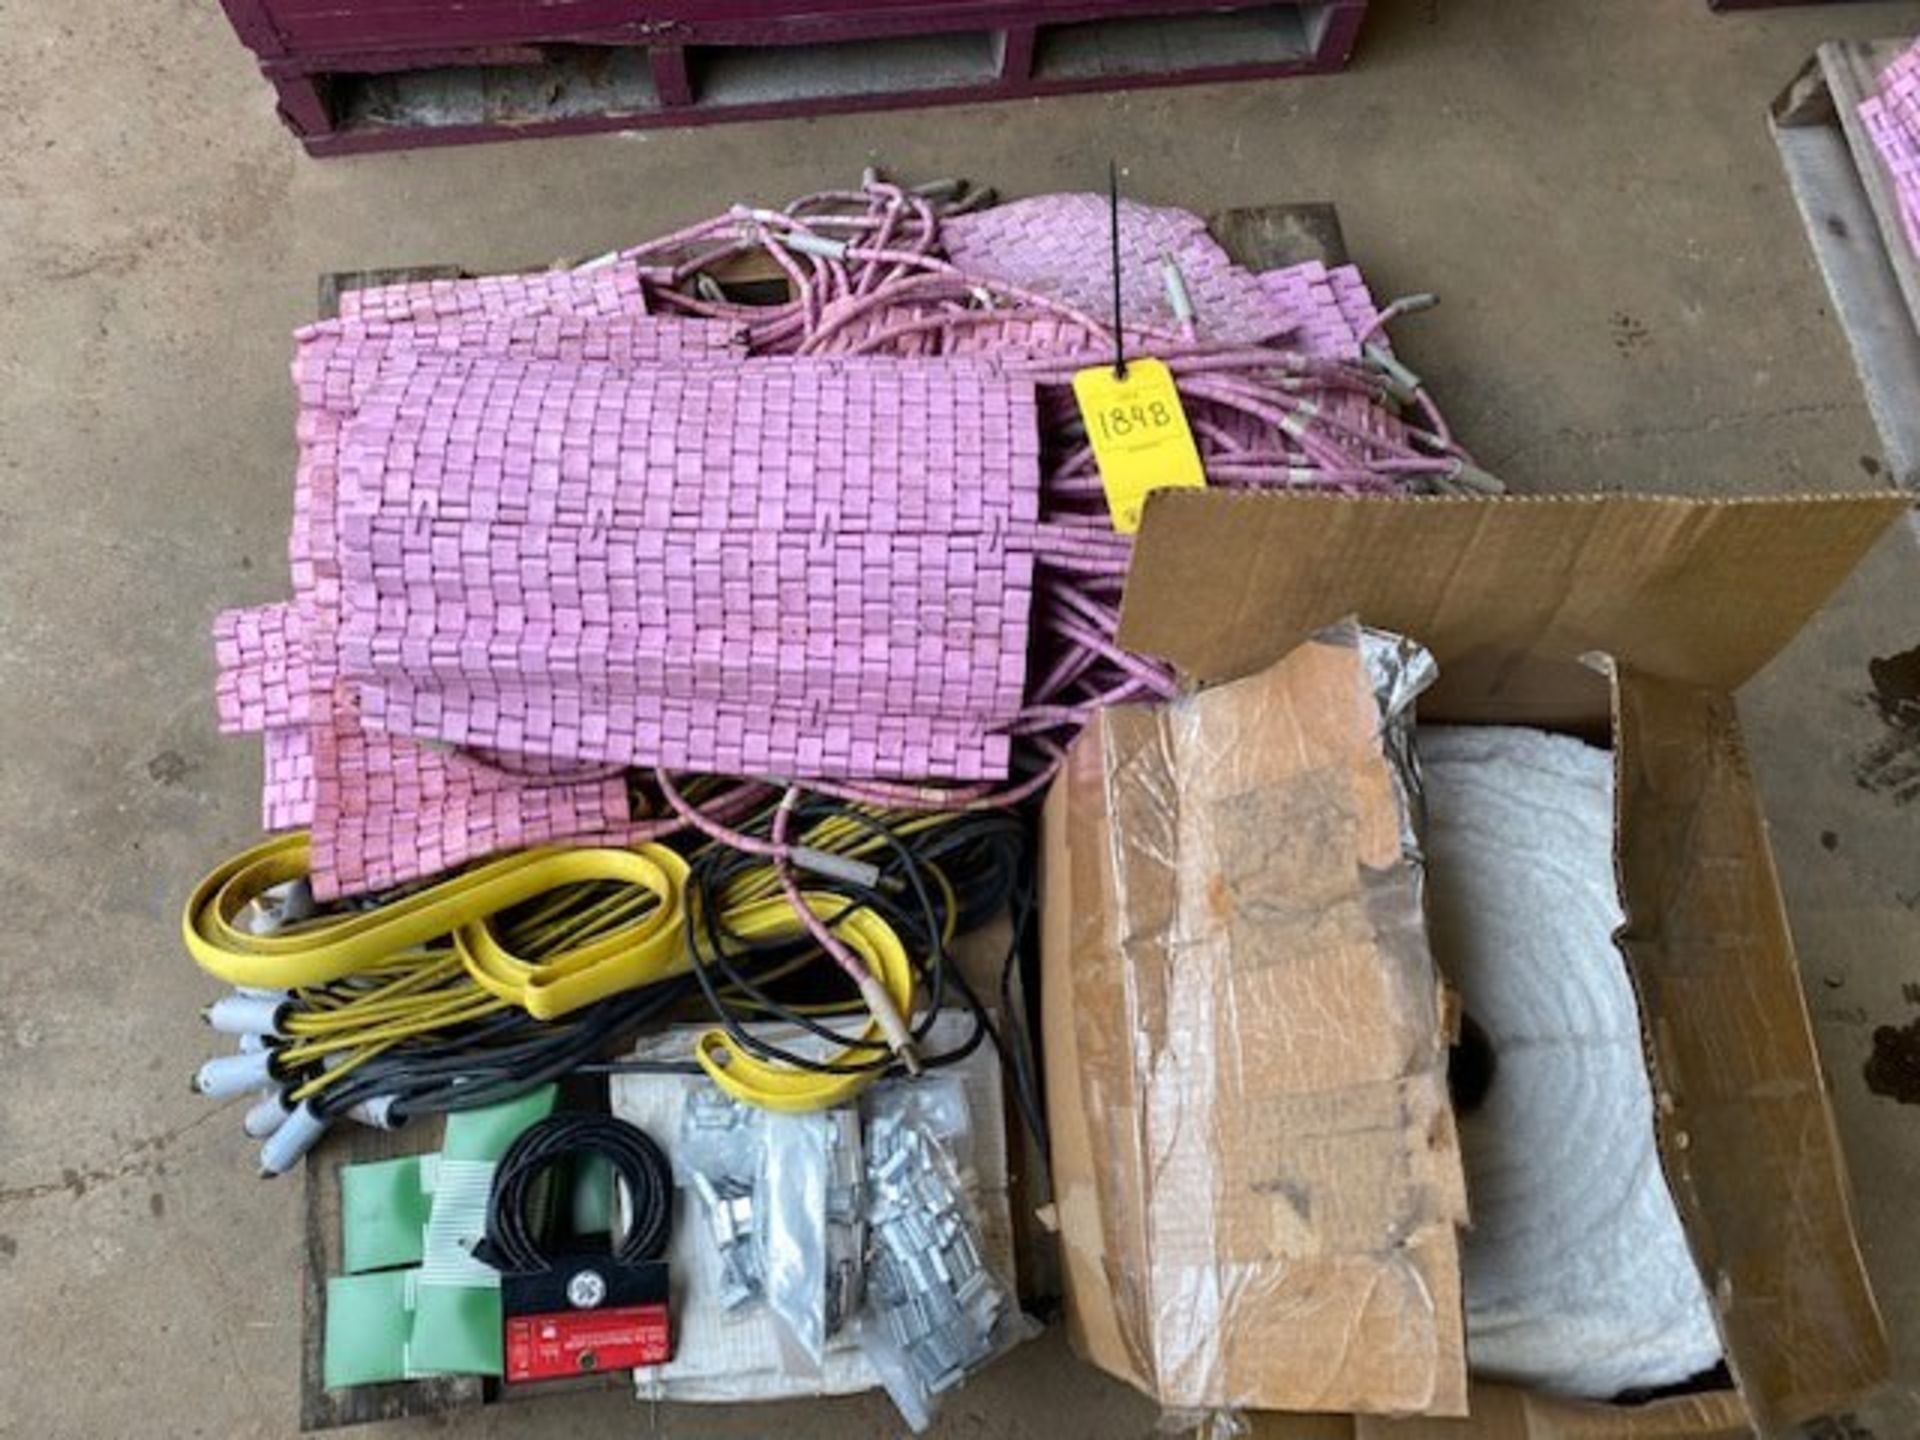 Lot of heat sensor cables, ceramic blankets and/or other accessories (TR 02). Contents to be